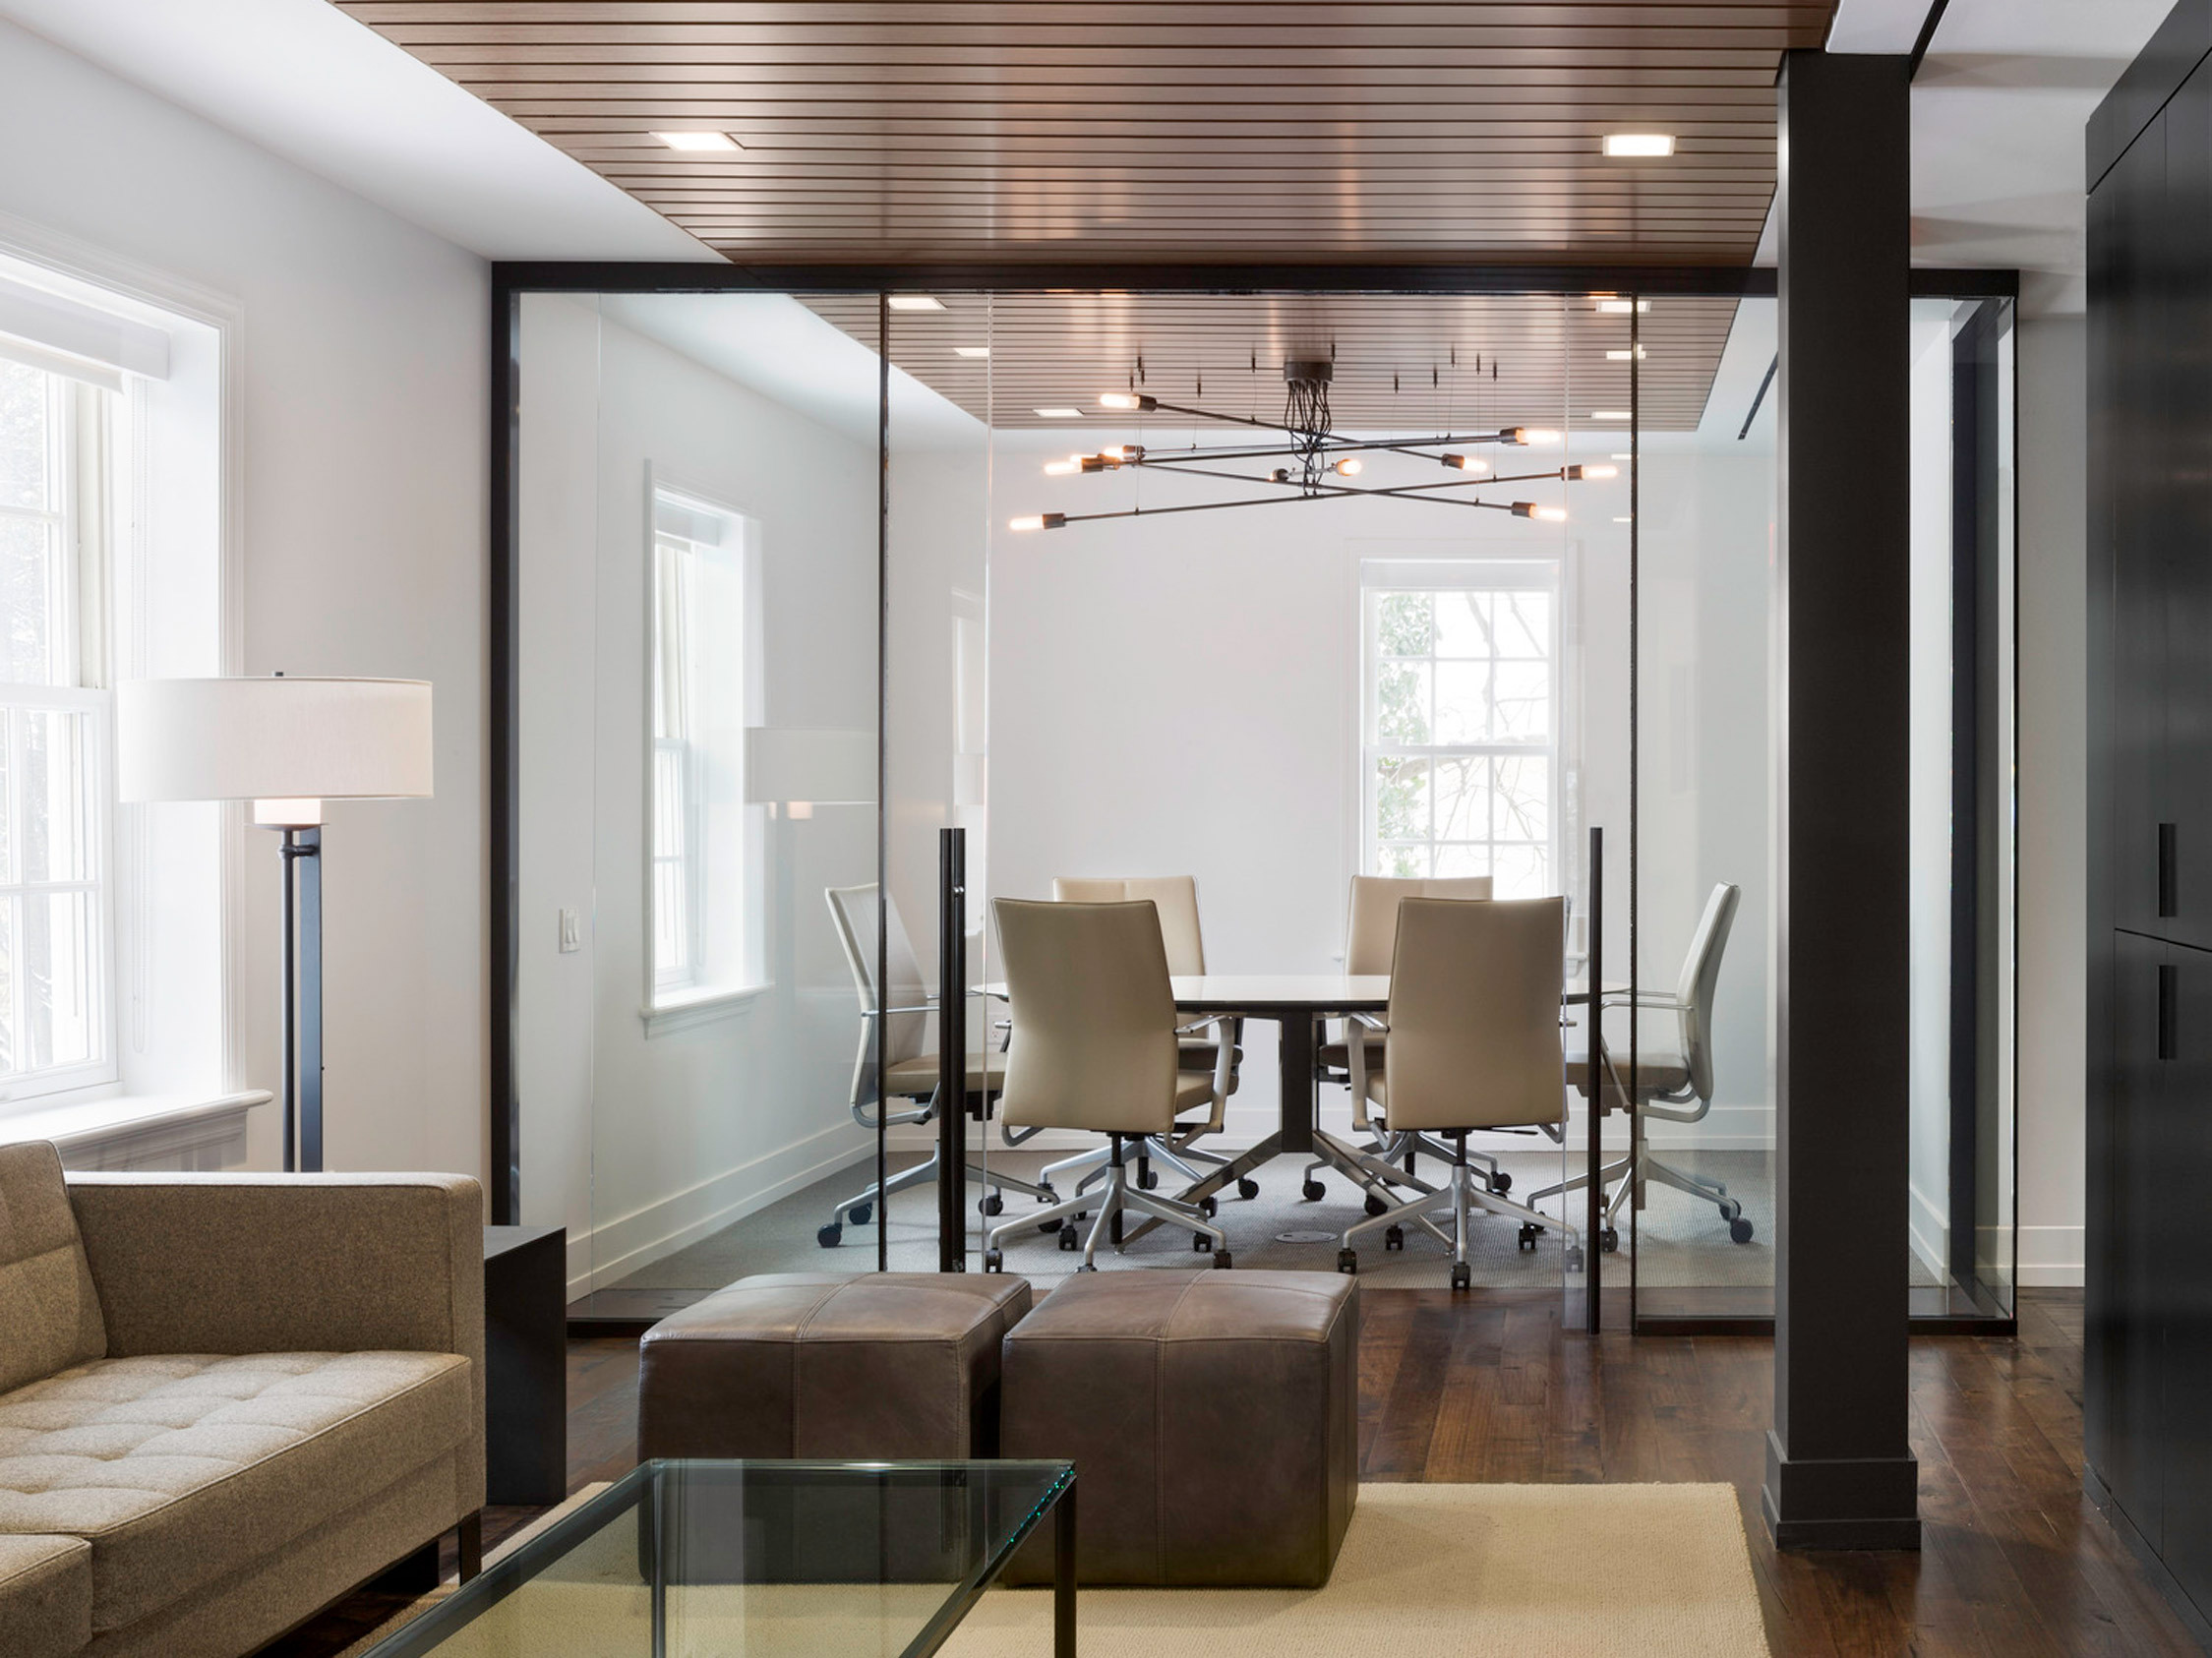 Modern conference room with a sleek, minimalist aesthetic. Features warm wood slat ceiling accents, recessed lighting, and a suspended spider chandelier. Floor-to-ceiling windows provide ample natural light, complementing the neutral color palette and clean lines of the furnishings.